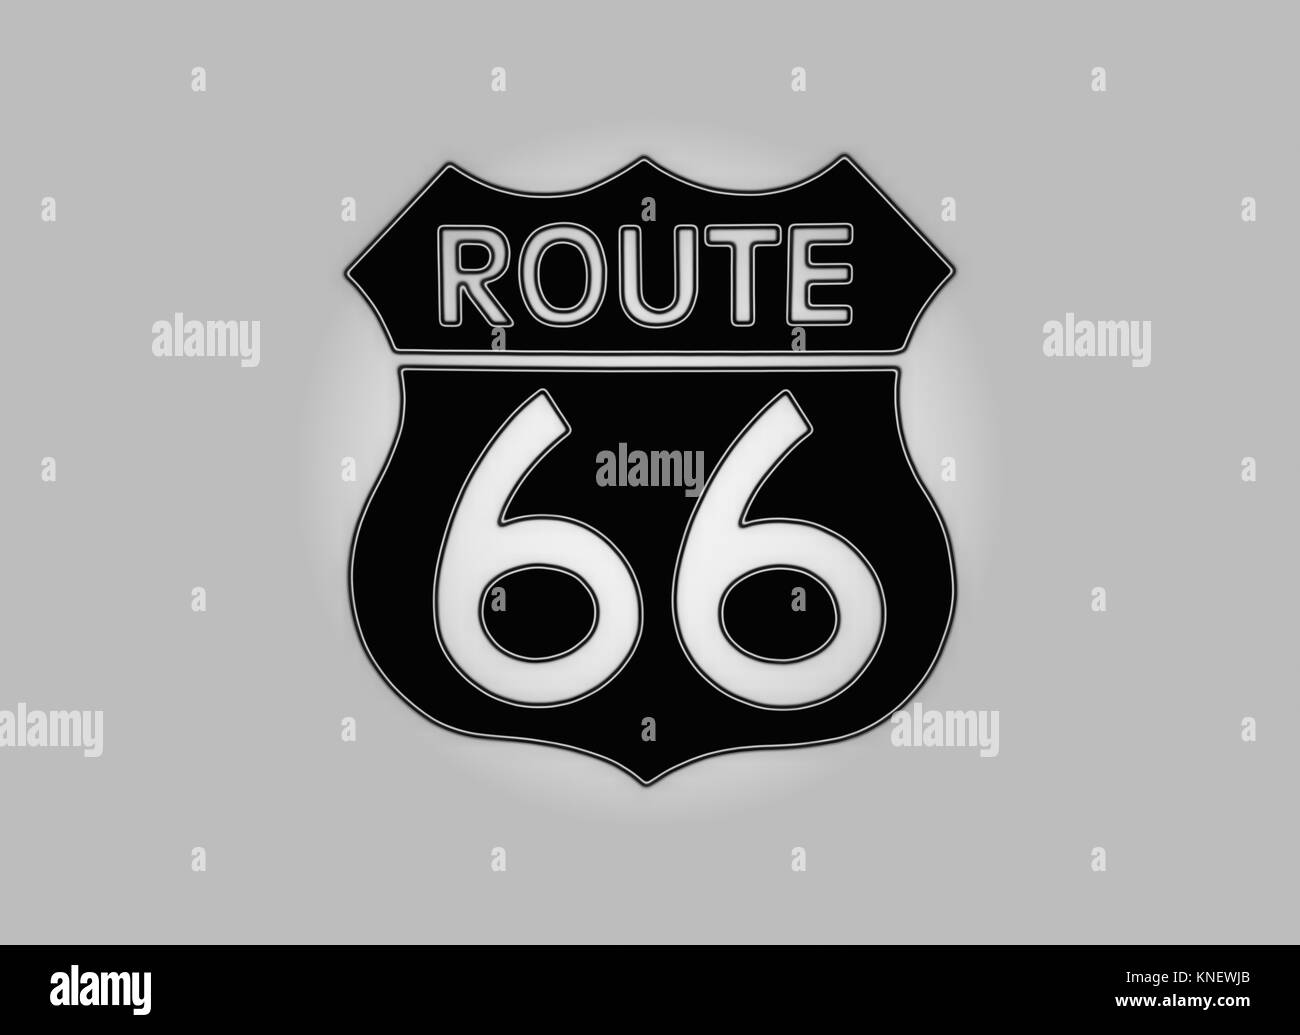 Travel USA sign of Route 66 label. American road icon. Stock Photo